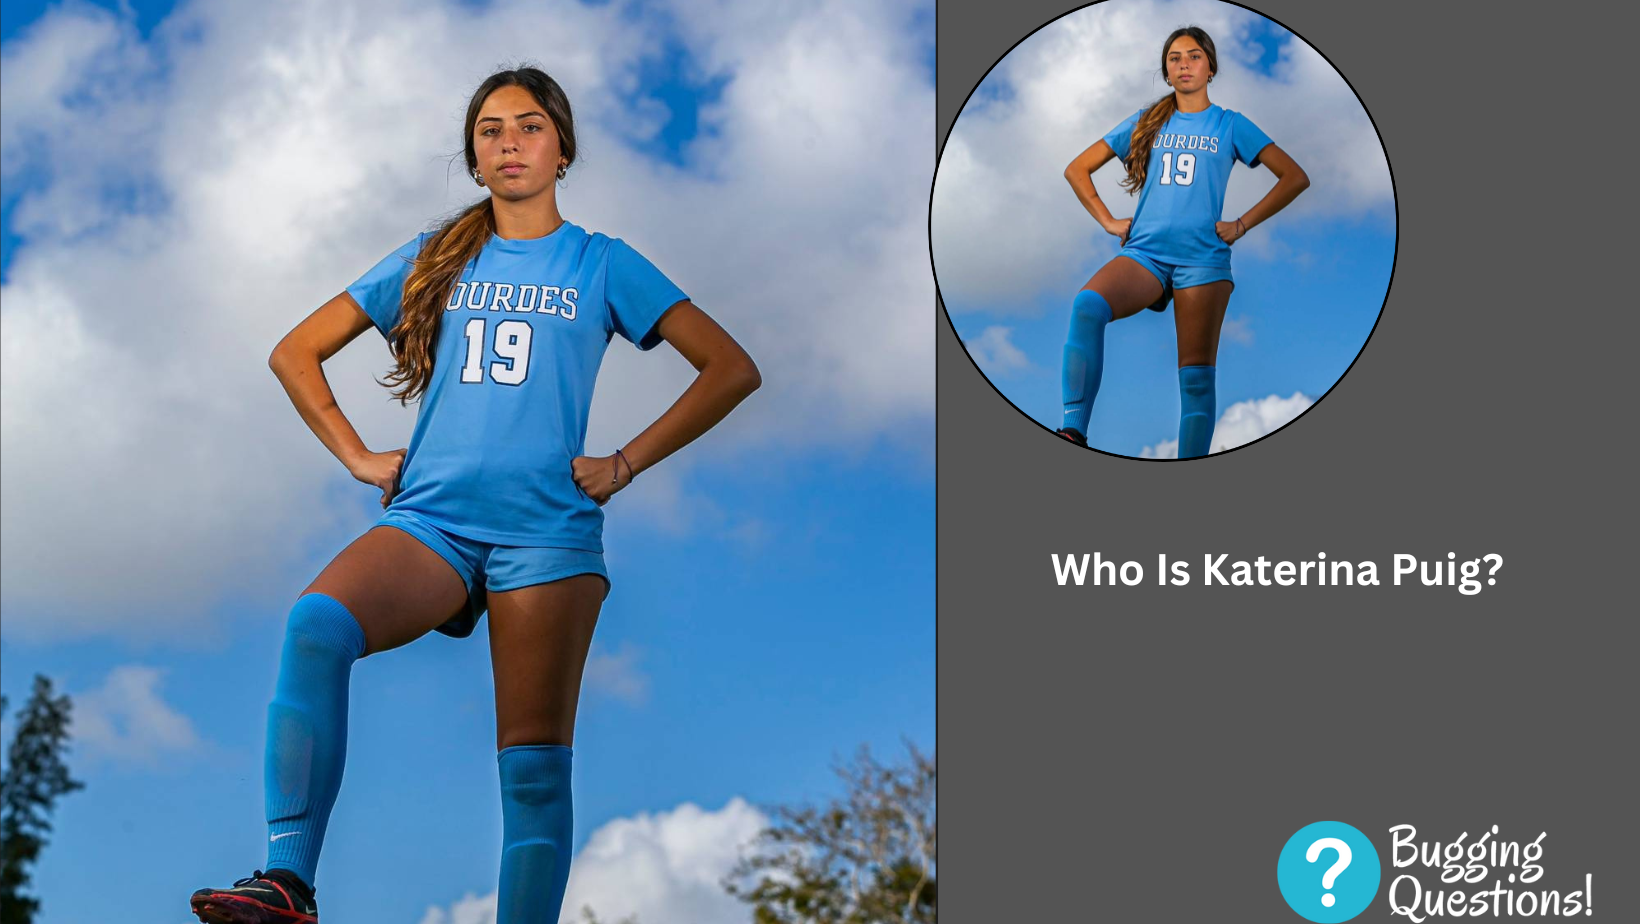 Who Is Katerina Puig?